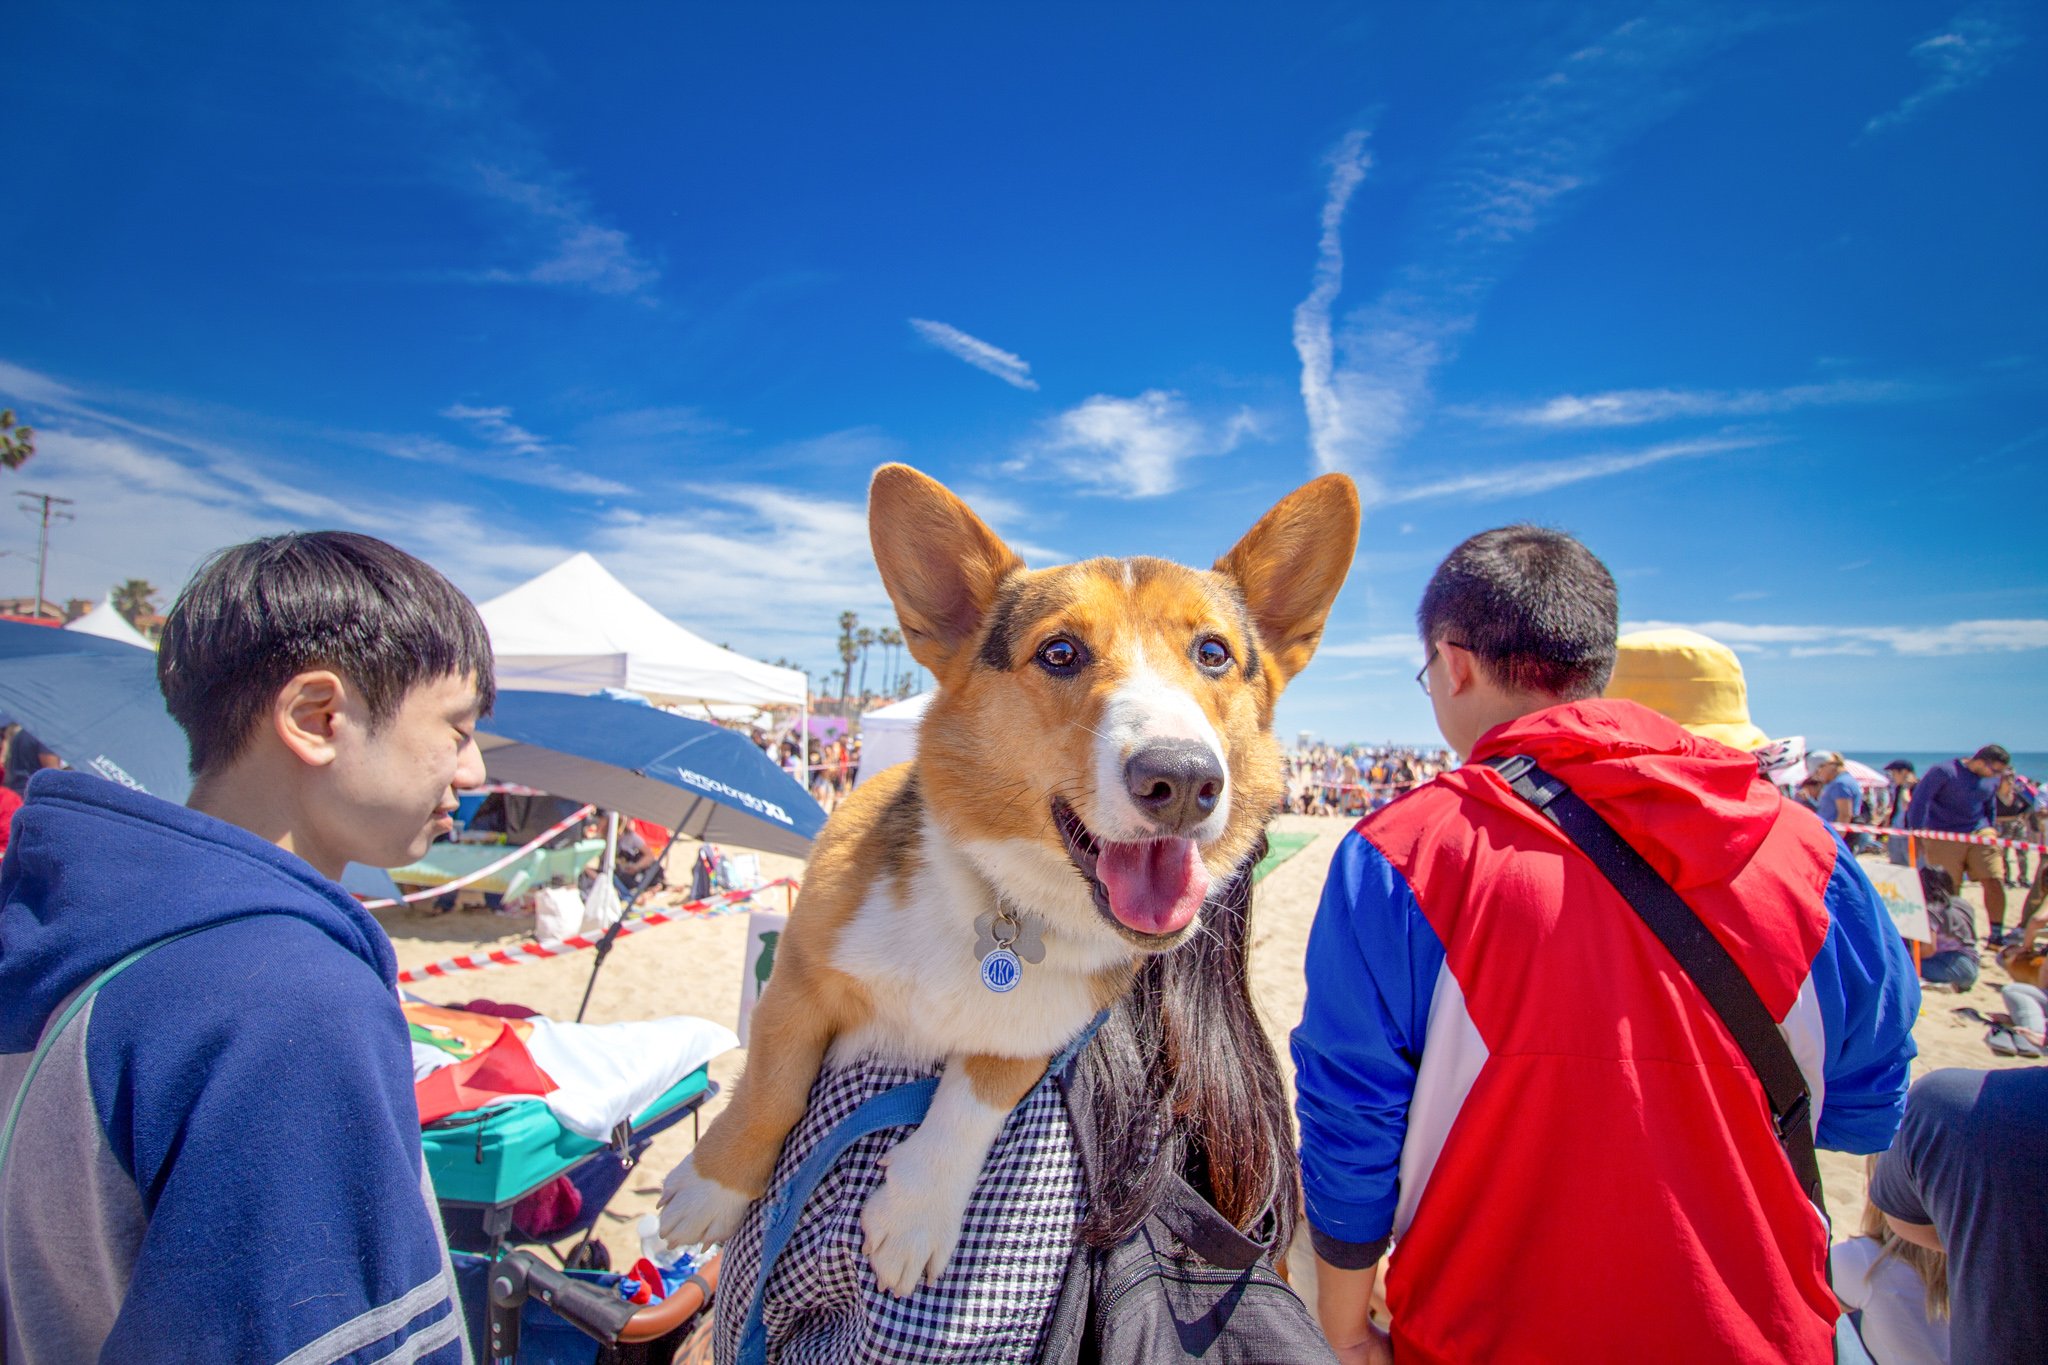 Orange County Pet and Dog Photography - by Steamer Lee - Corgi Beach Day Spring 2019 - Southern Caliornia 27.JPG